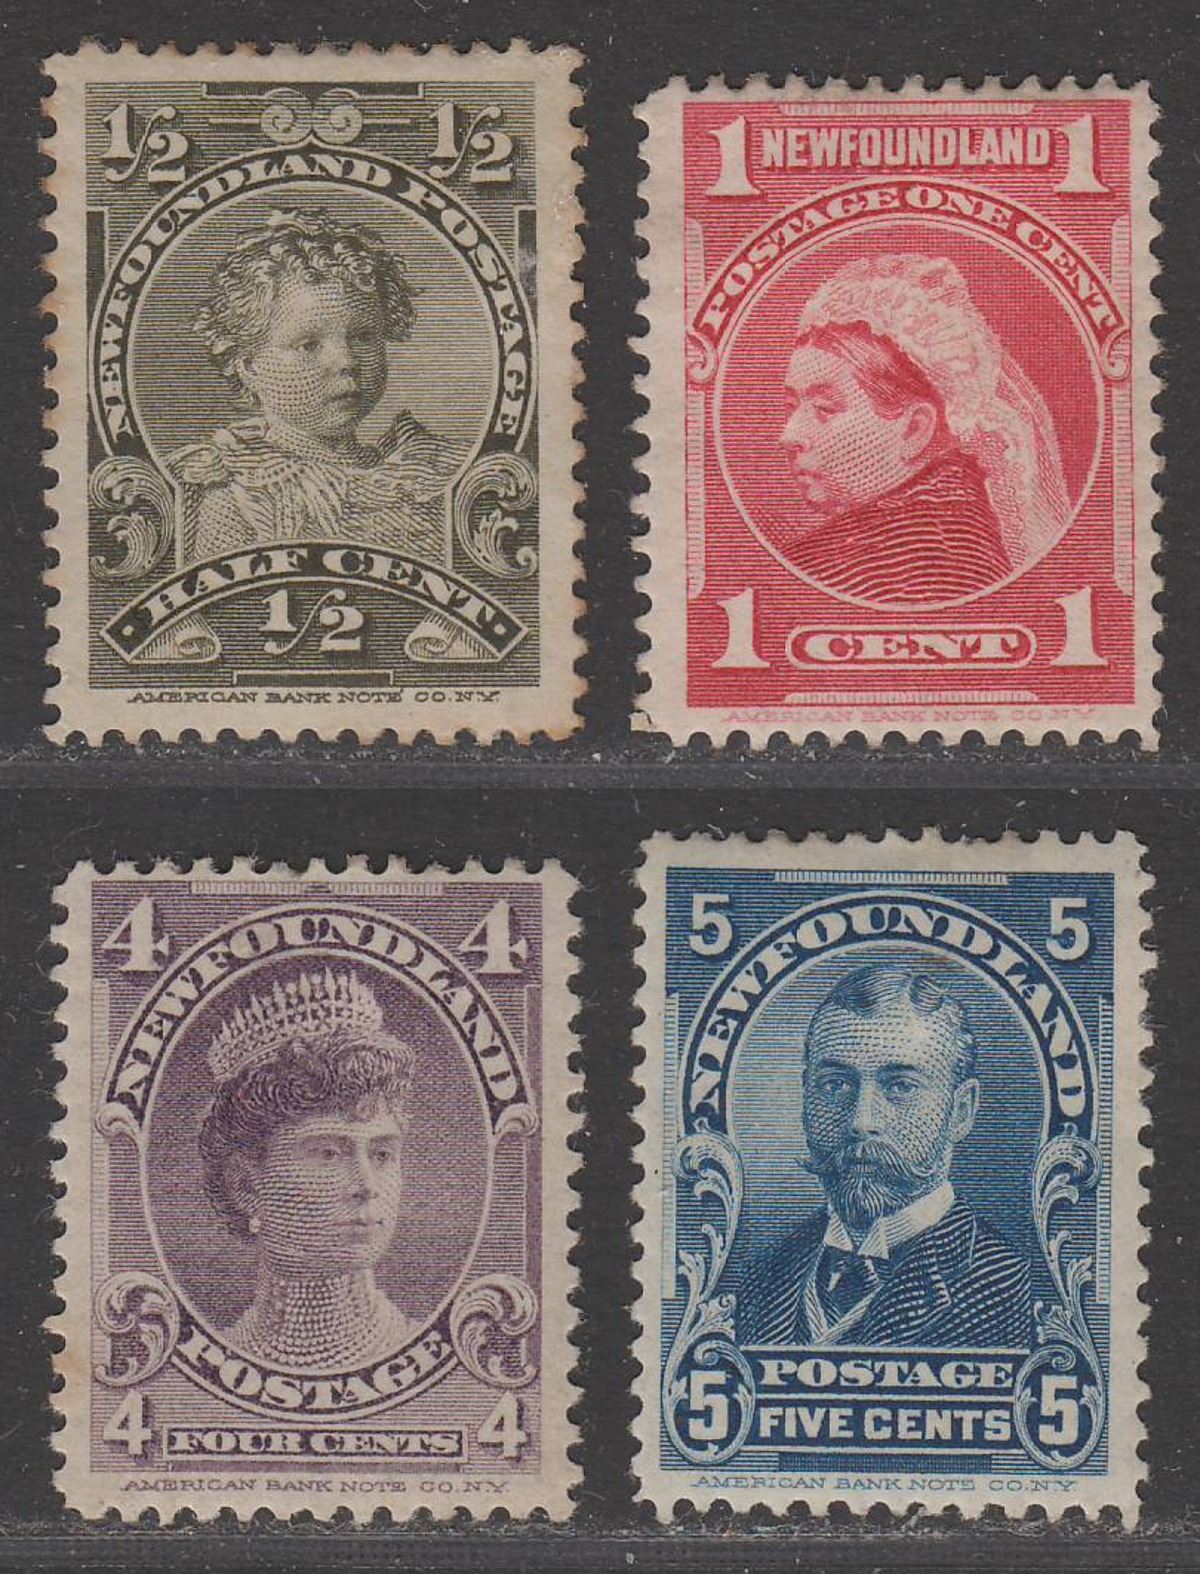 Newfoundland 1897 Queen Victoria Part Set to 5c Mint with faults